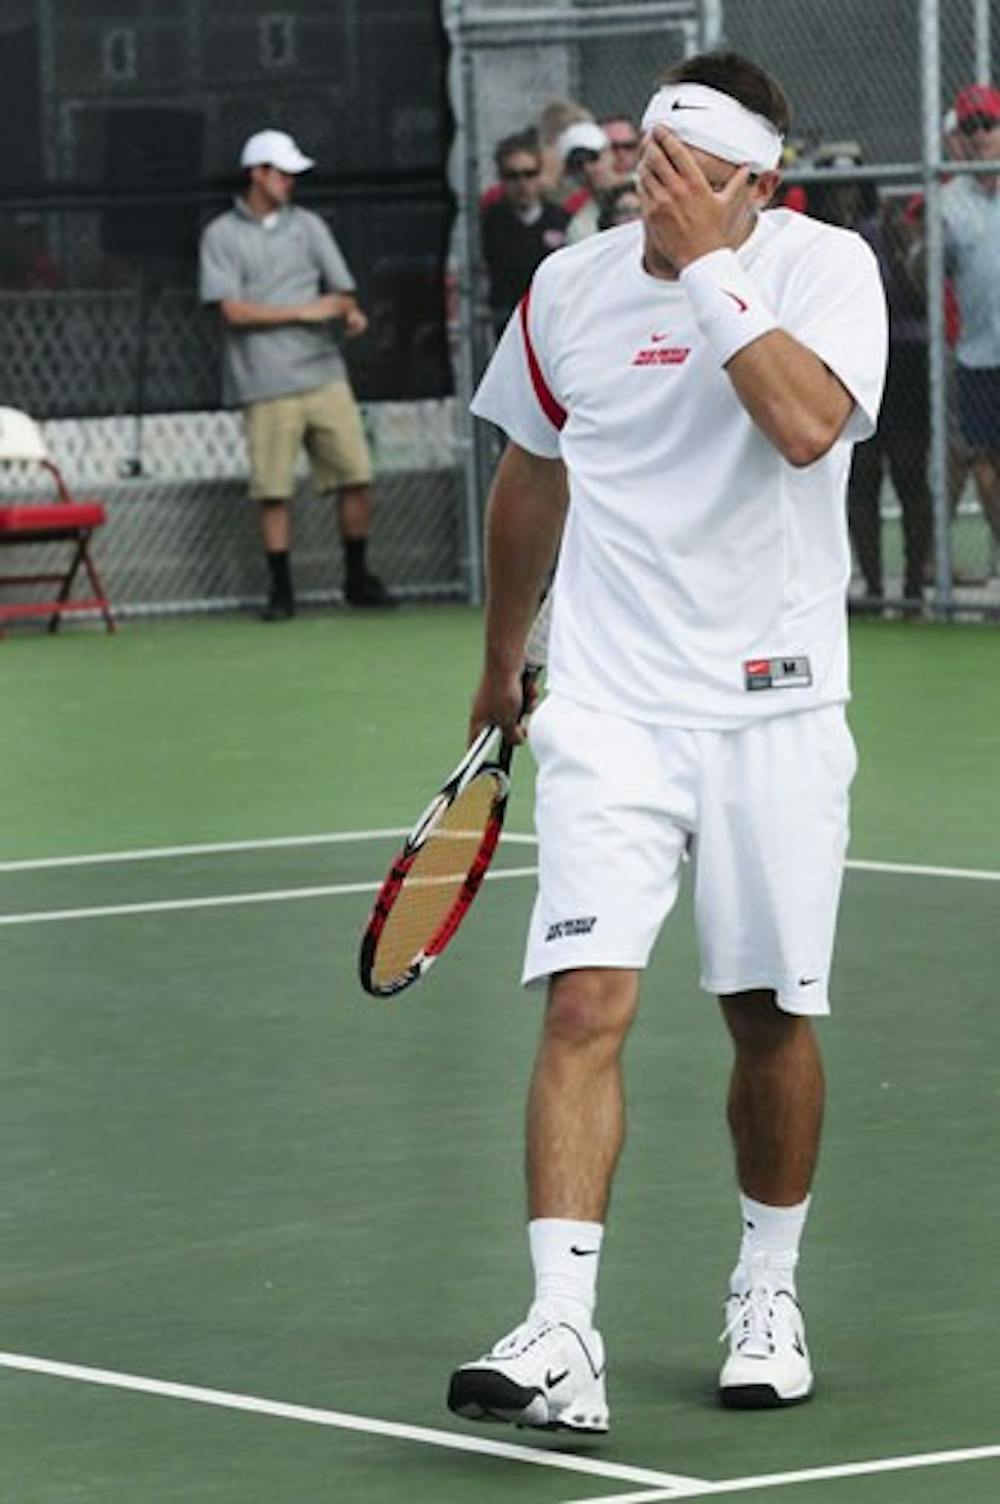 In this file photo, Johnny Parkes walks off the tennis court in disgust. But Parkes will be the lone Lobo representing UNM in the NCAA singles competition set to start on May 20.